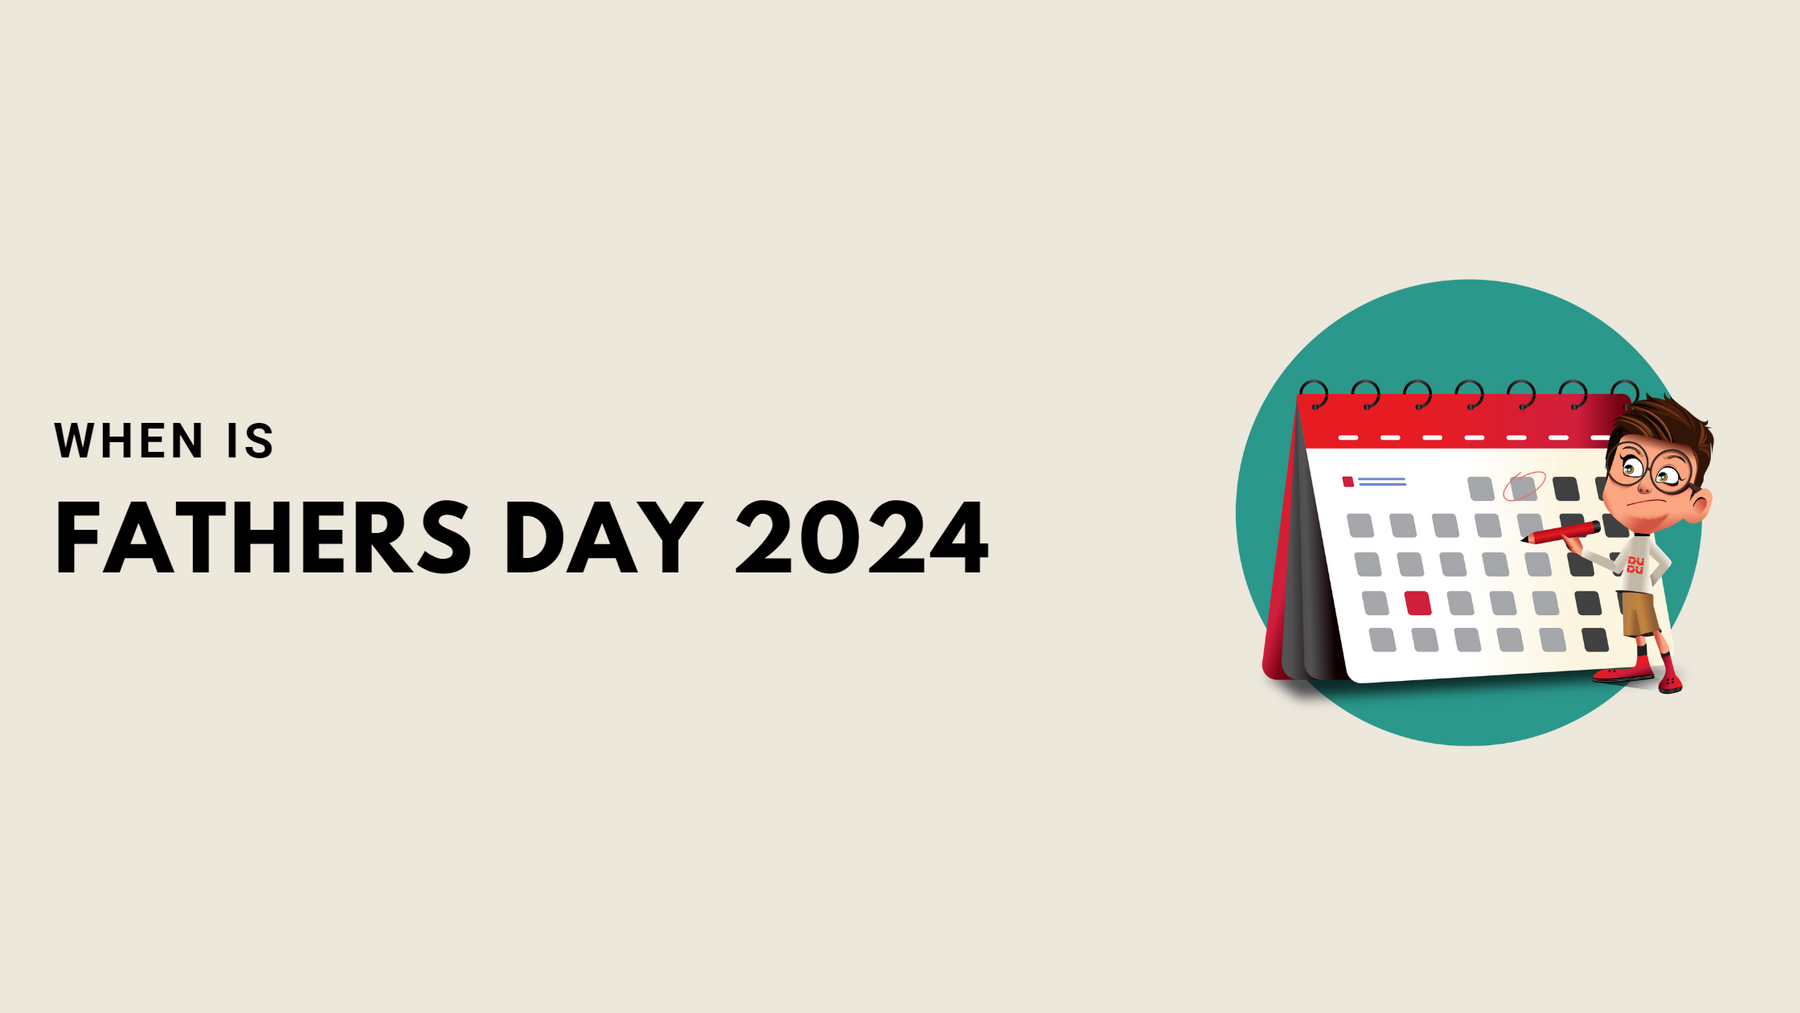 When Is Fathers Day 2024?